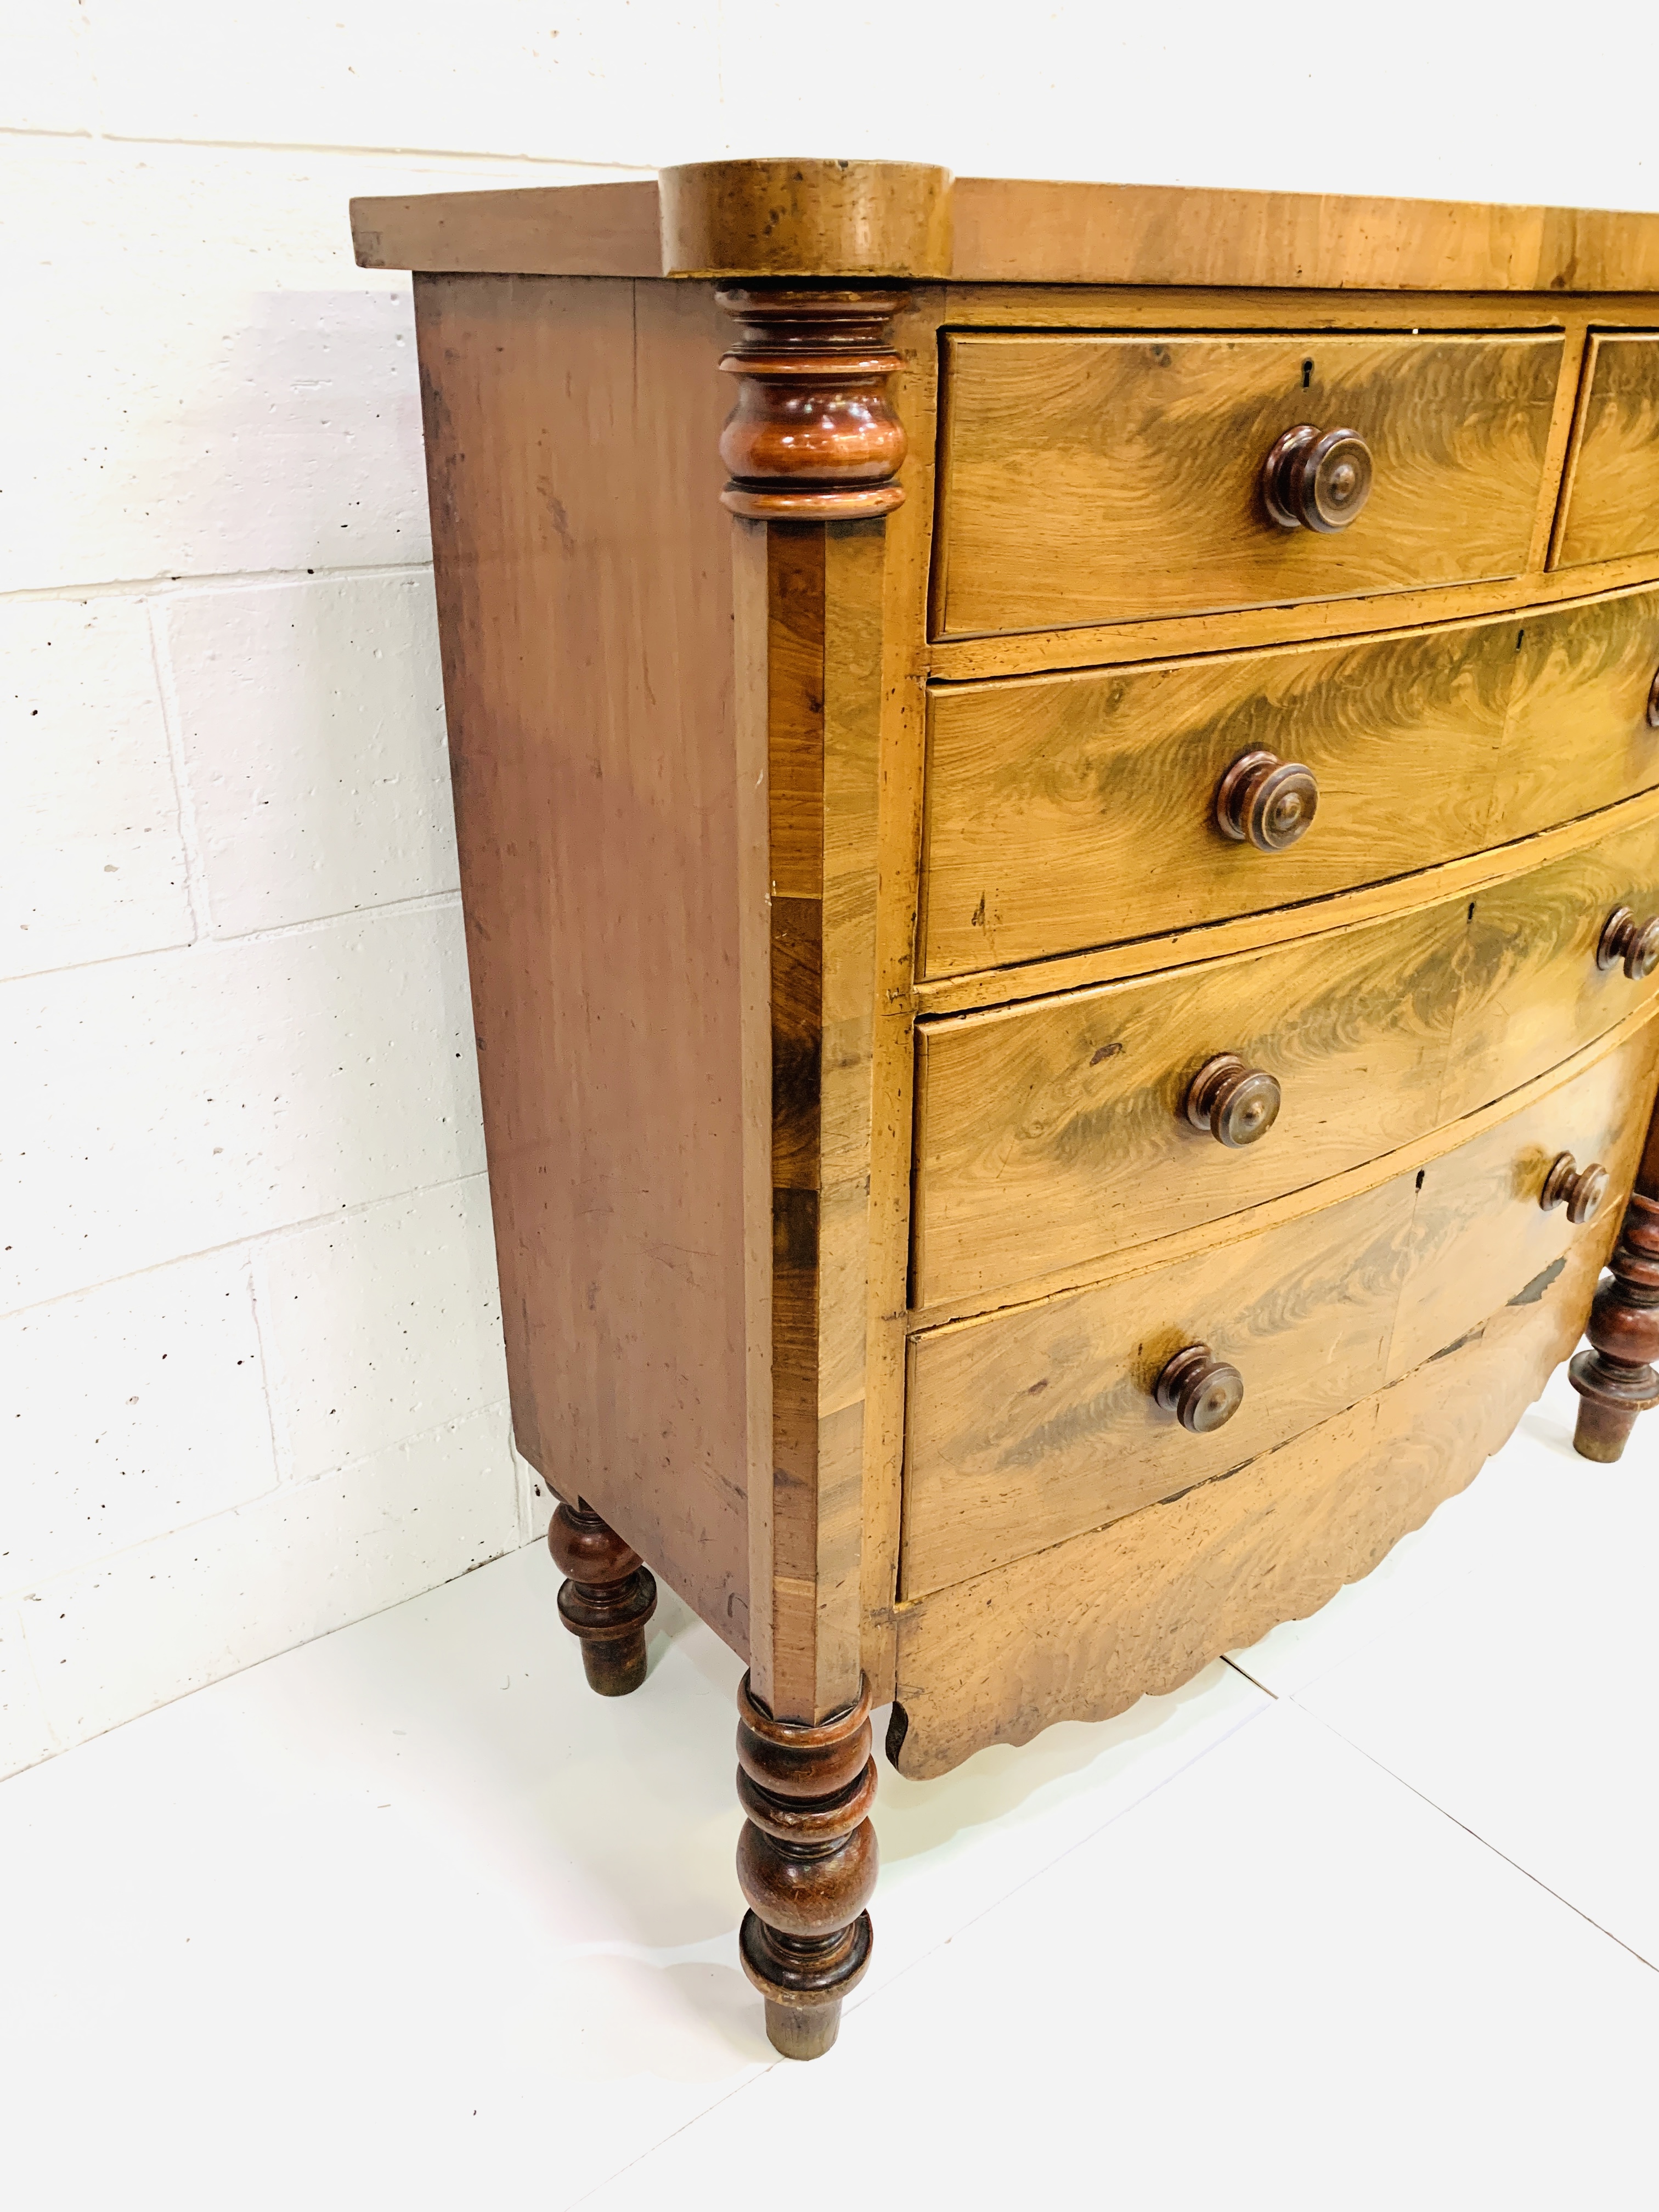 Victorian mahogany veneer Scotch chest of drawers - Image 3 of 8